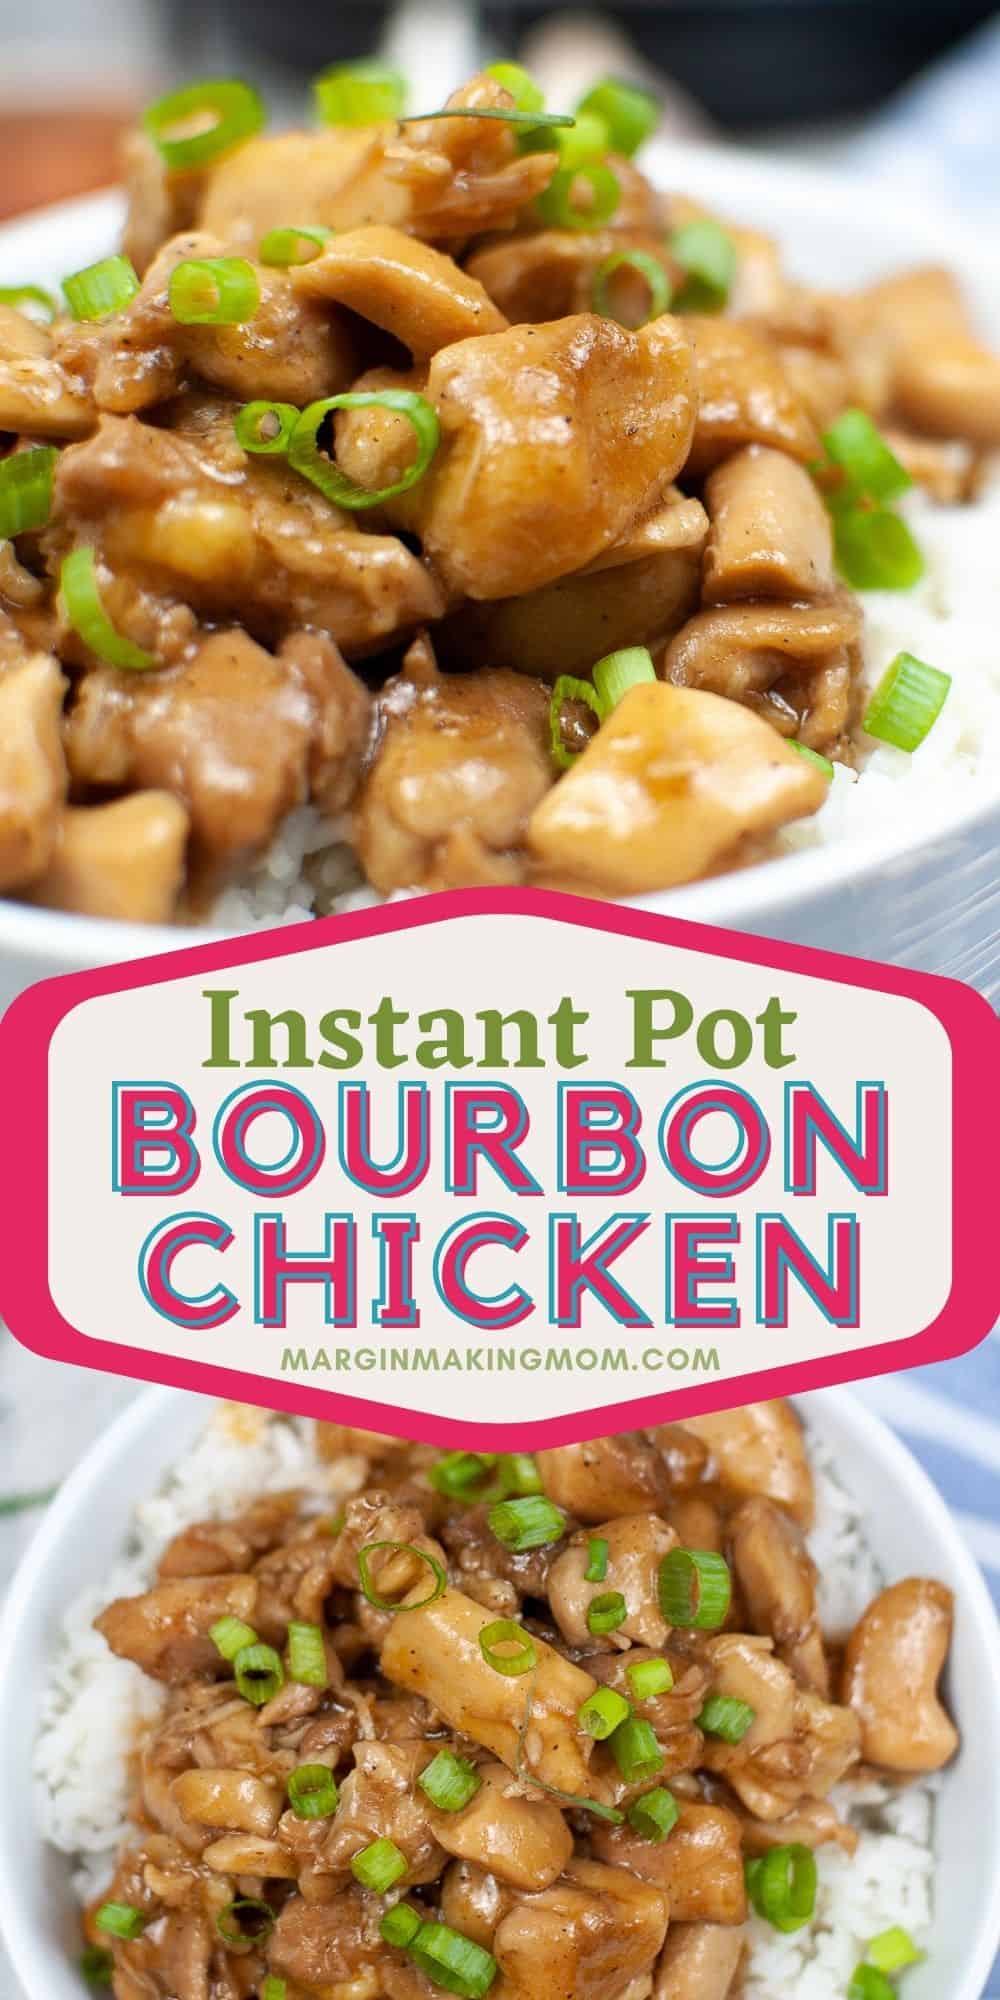 collage image featuring two photos of  bourbon chicken cooked in the Instant Pot, including a close-up view and an overhead view